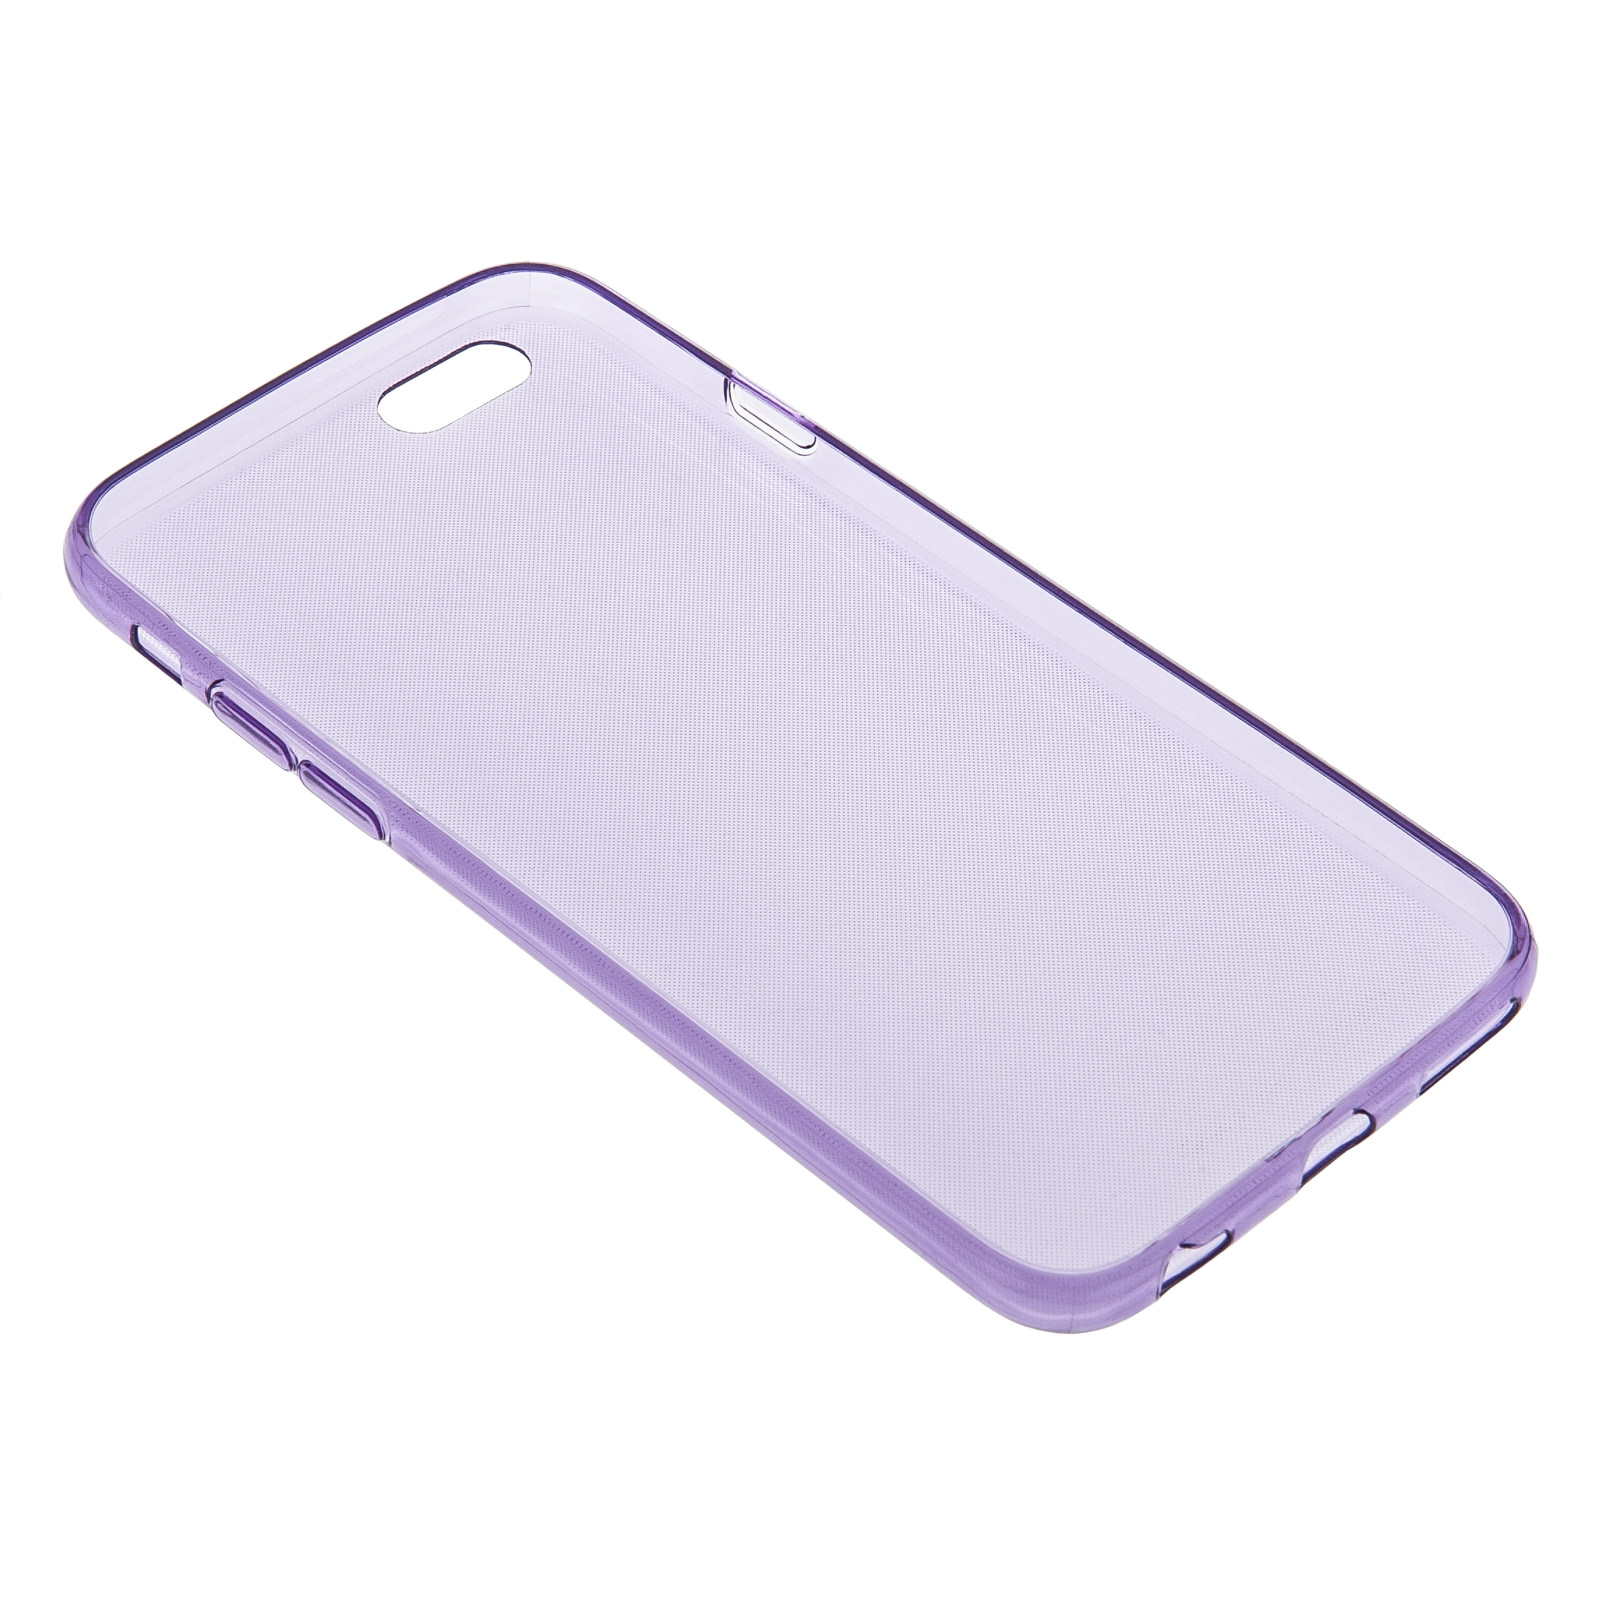 Yousave Accessories iPhone 6 and 6s Ultra Thin Gel Case - Purple